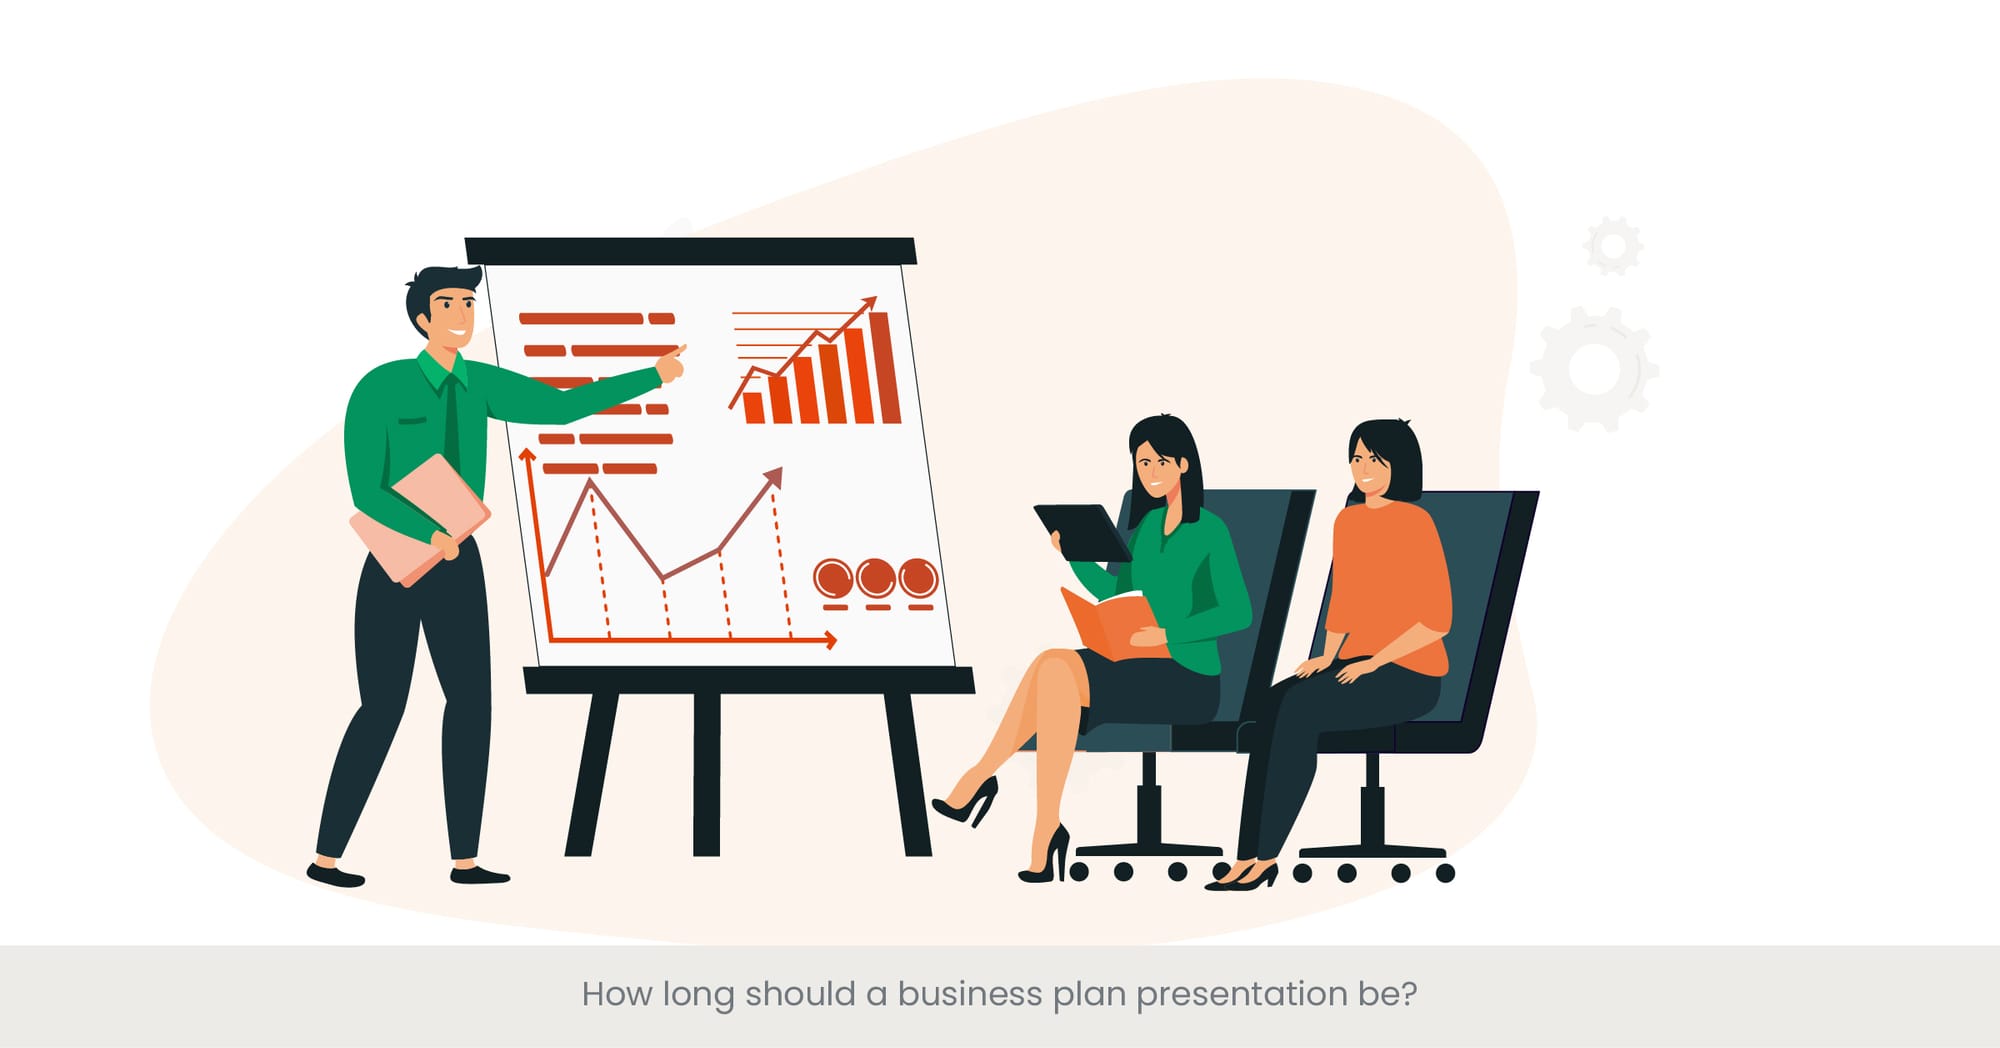   How long should a business plan presentation be?